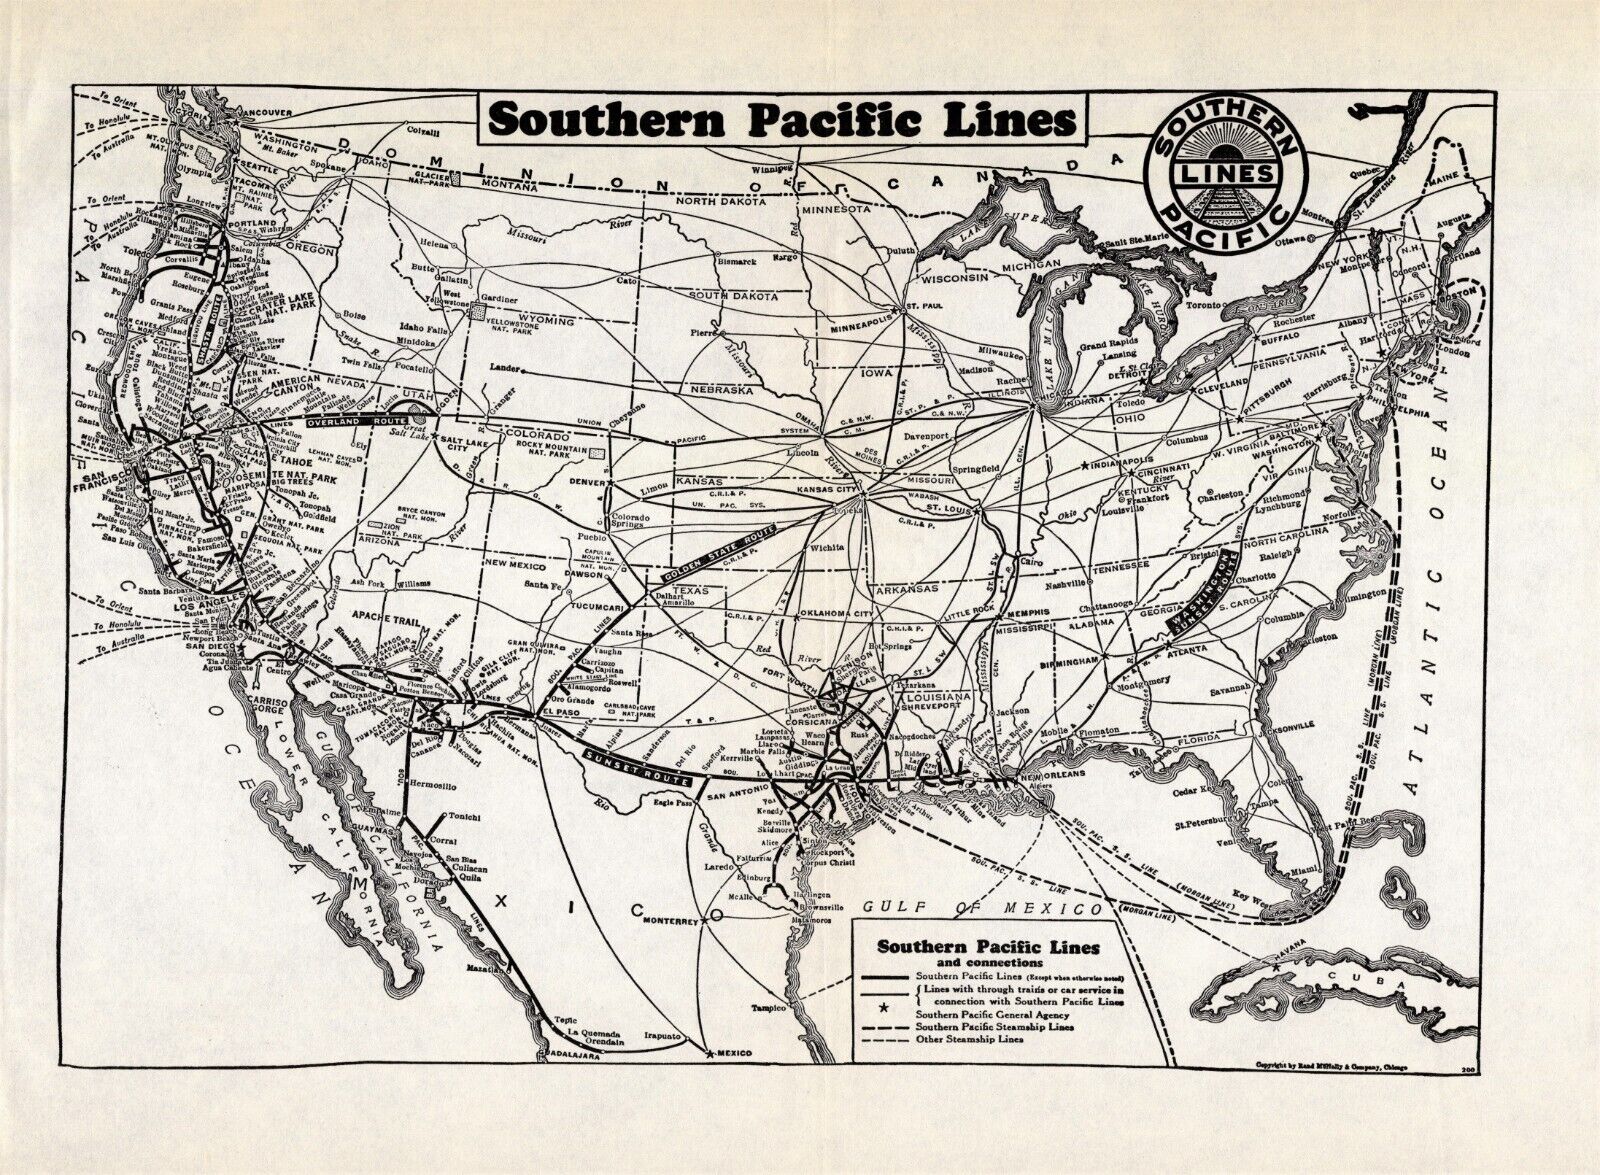 1941 Antique SOUTHERN PACIFIC Railroad Map Vintage Railway Map 808